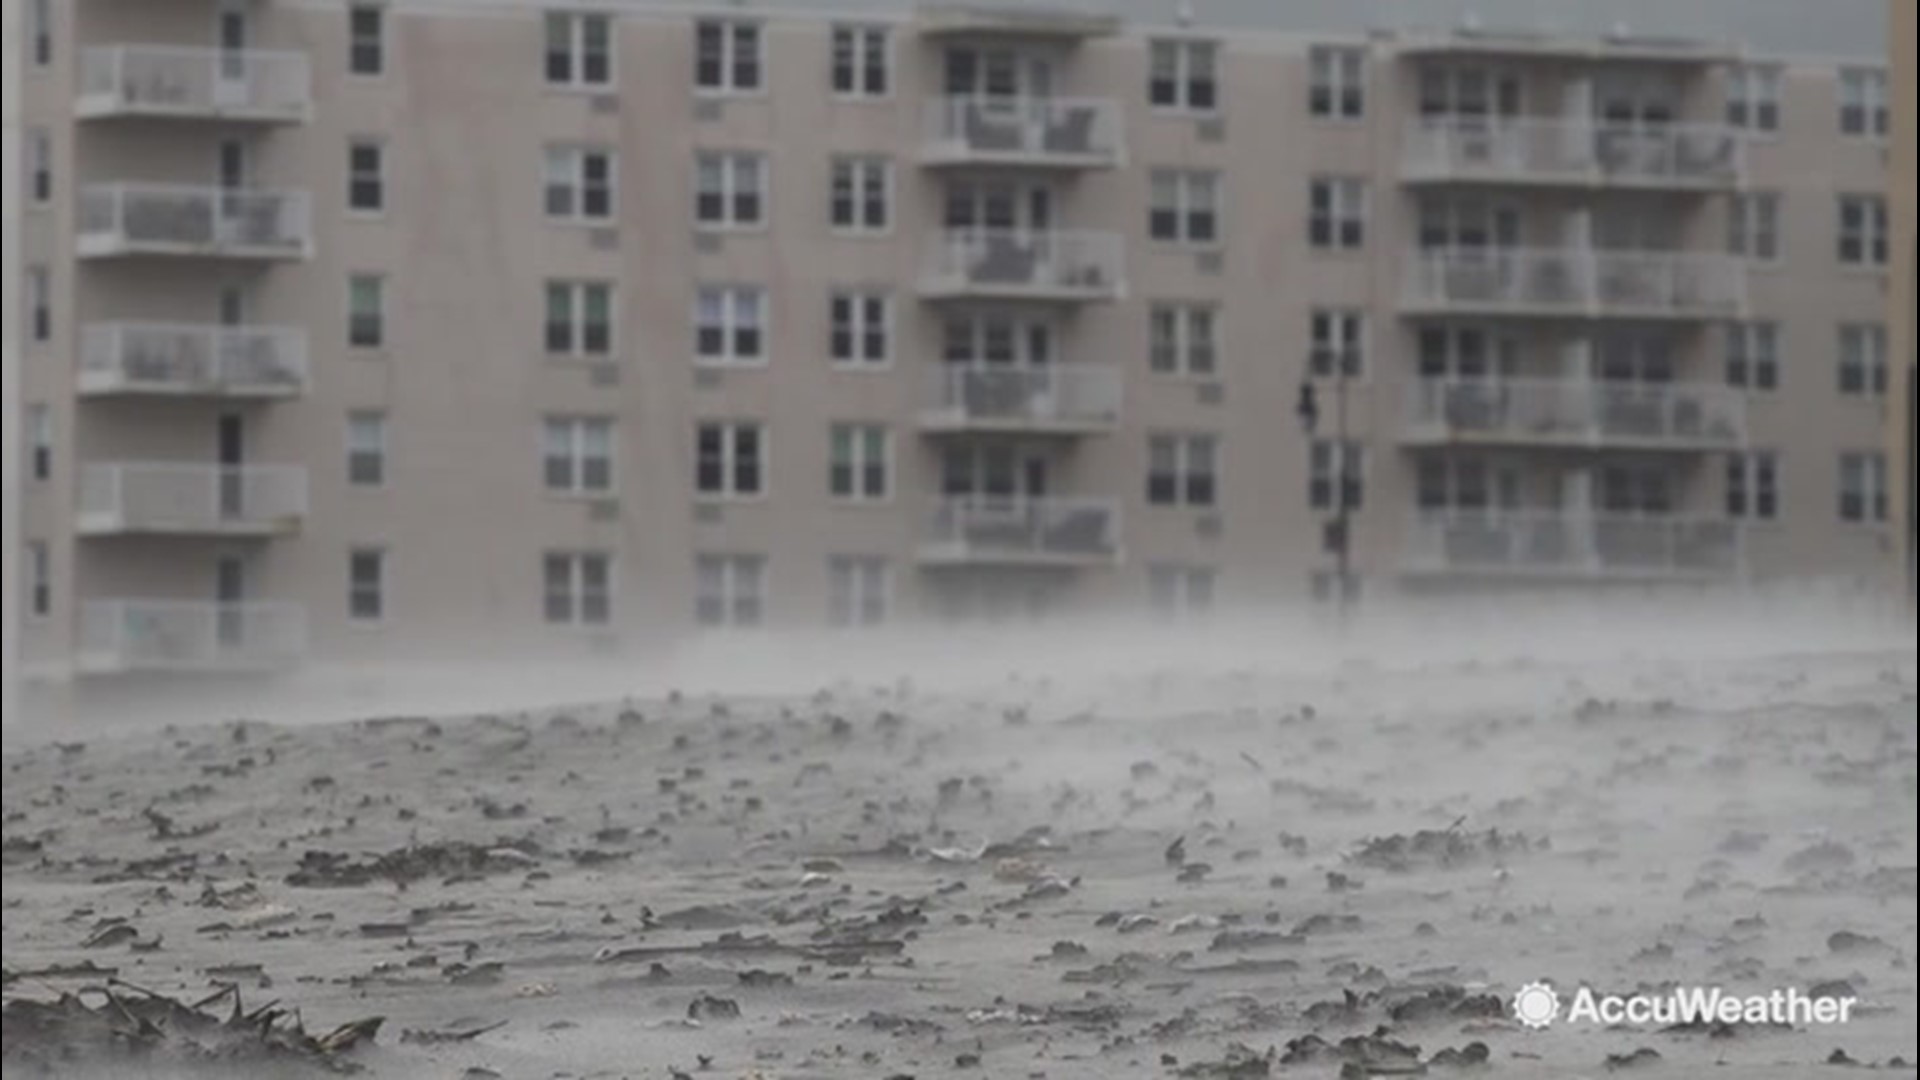 On Oct. 16, a strong storm system battered the east coast with powerful winds. For places like Long Beach, New York, the wind kicked up tons of sand and struck the nearby buildings with it.